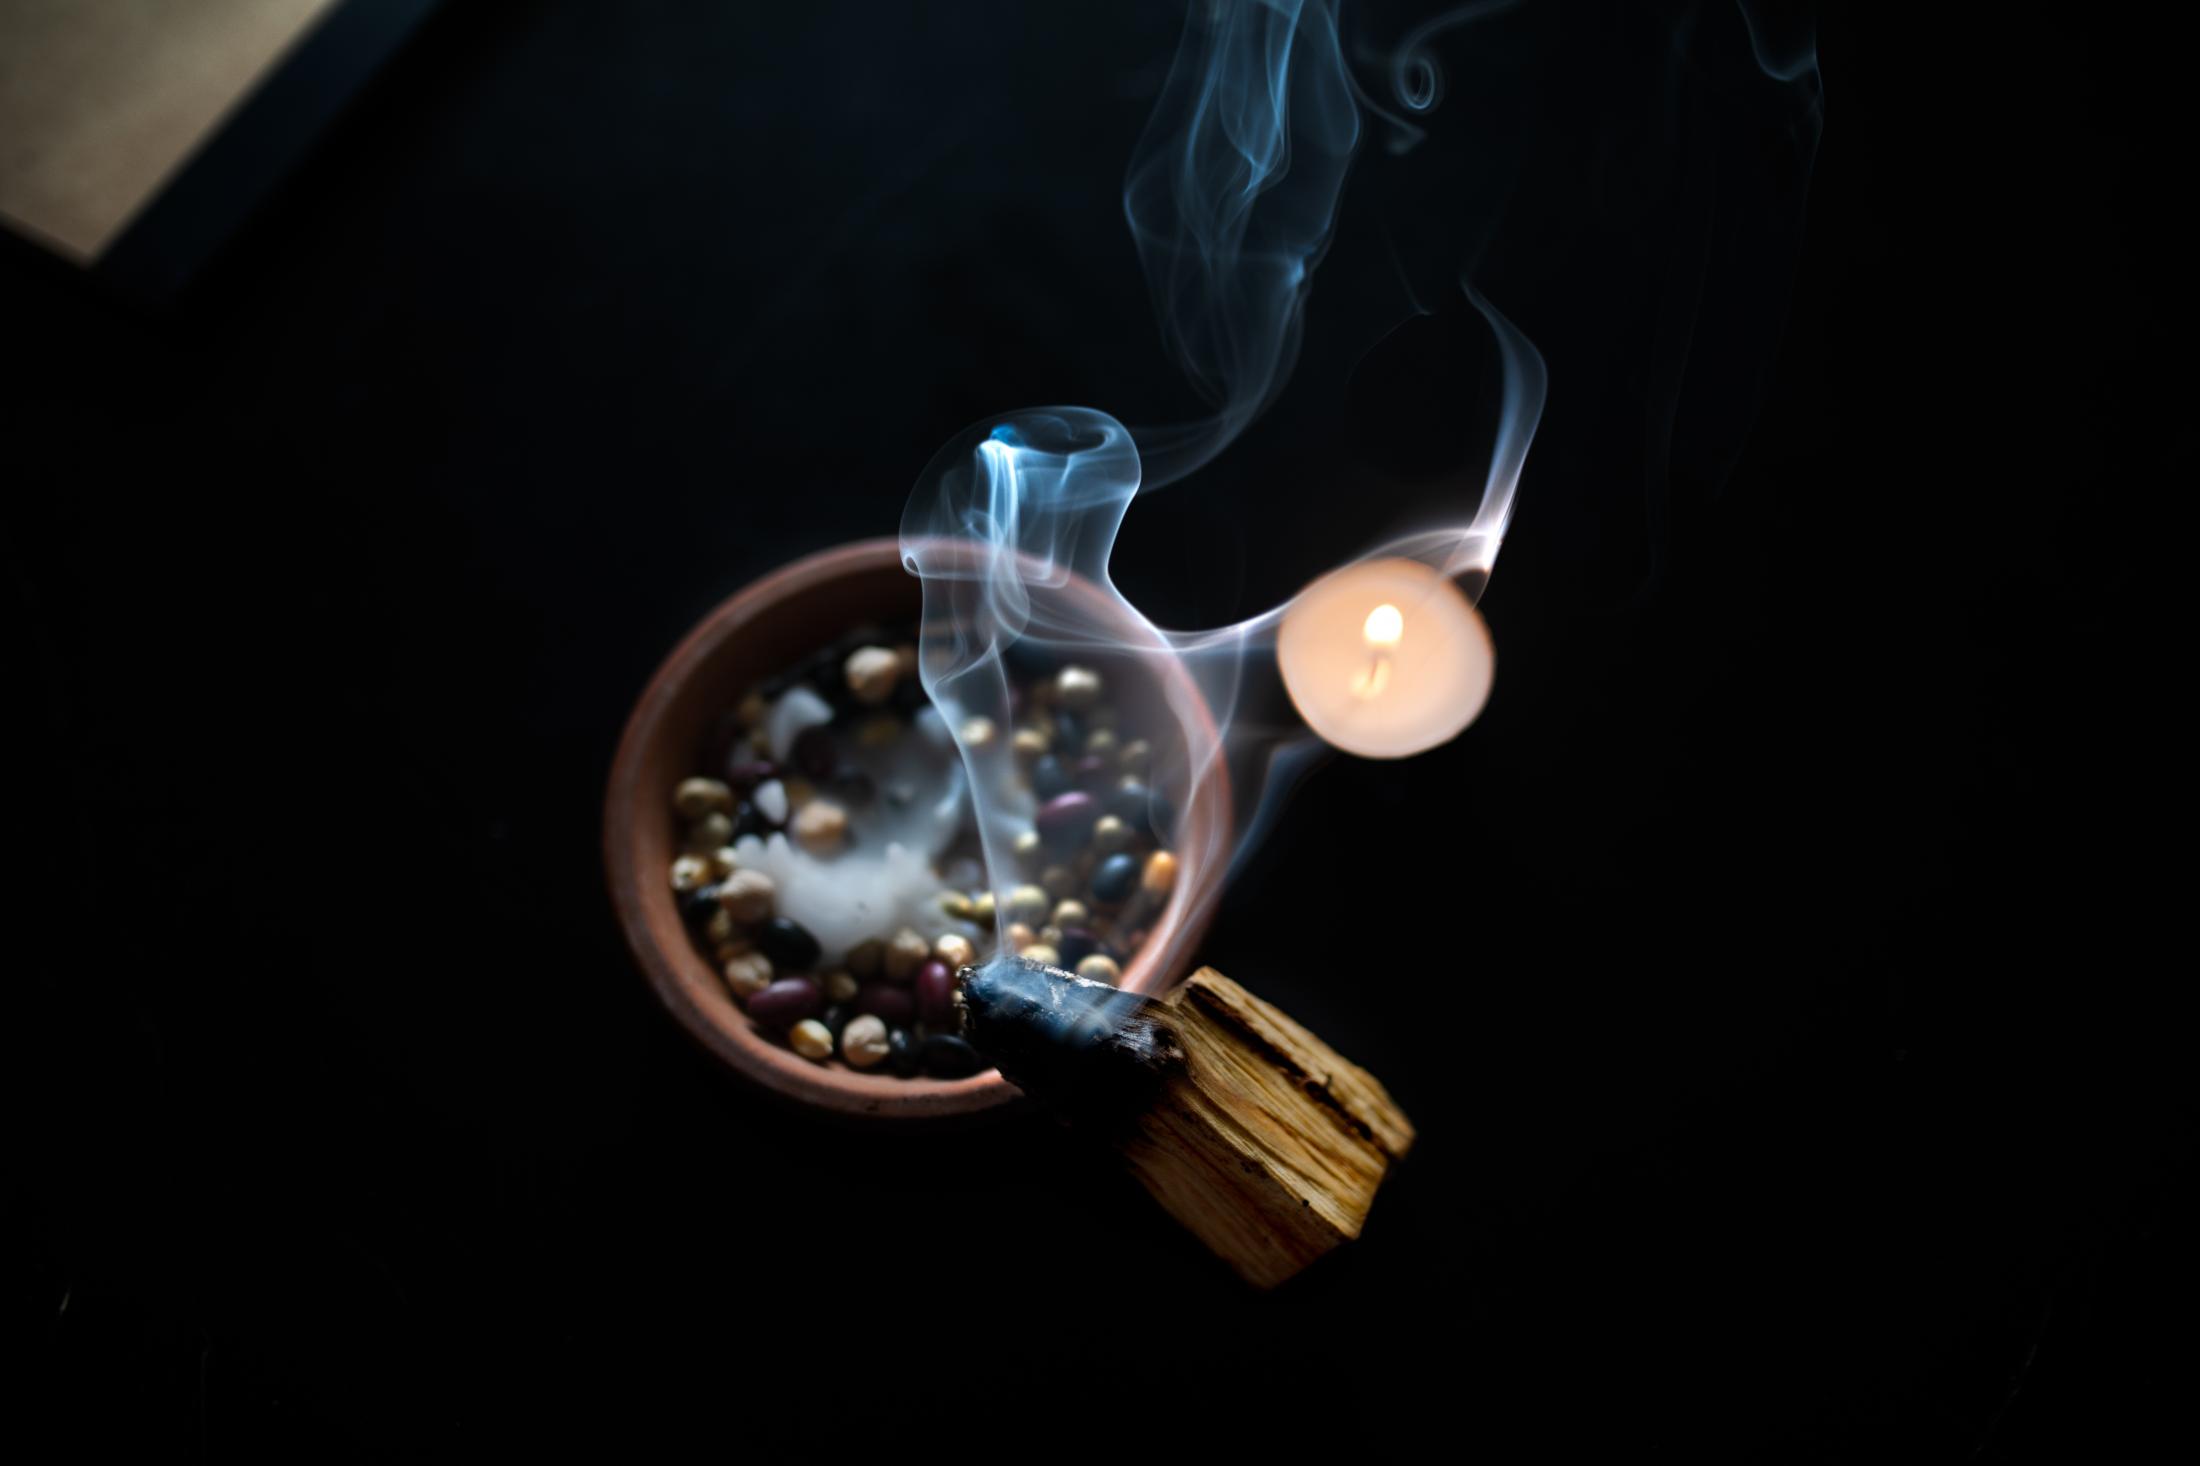 Going in and out of these intense emotional states, I found myself being grounded by the smell of the palo santo burning on my desk. Leah in the...